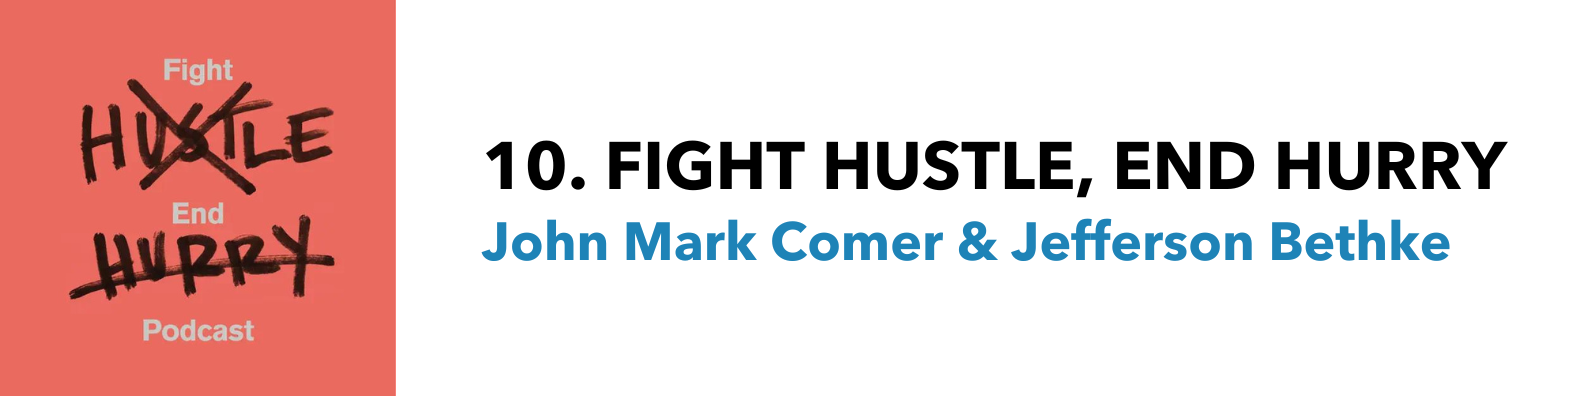 <a href="https://podcasts.apple.com/us/podcast/fight-hustle-end-hurry/id1480300467">Listen on Apple Podcasts</a>